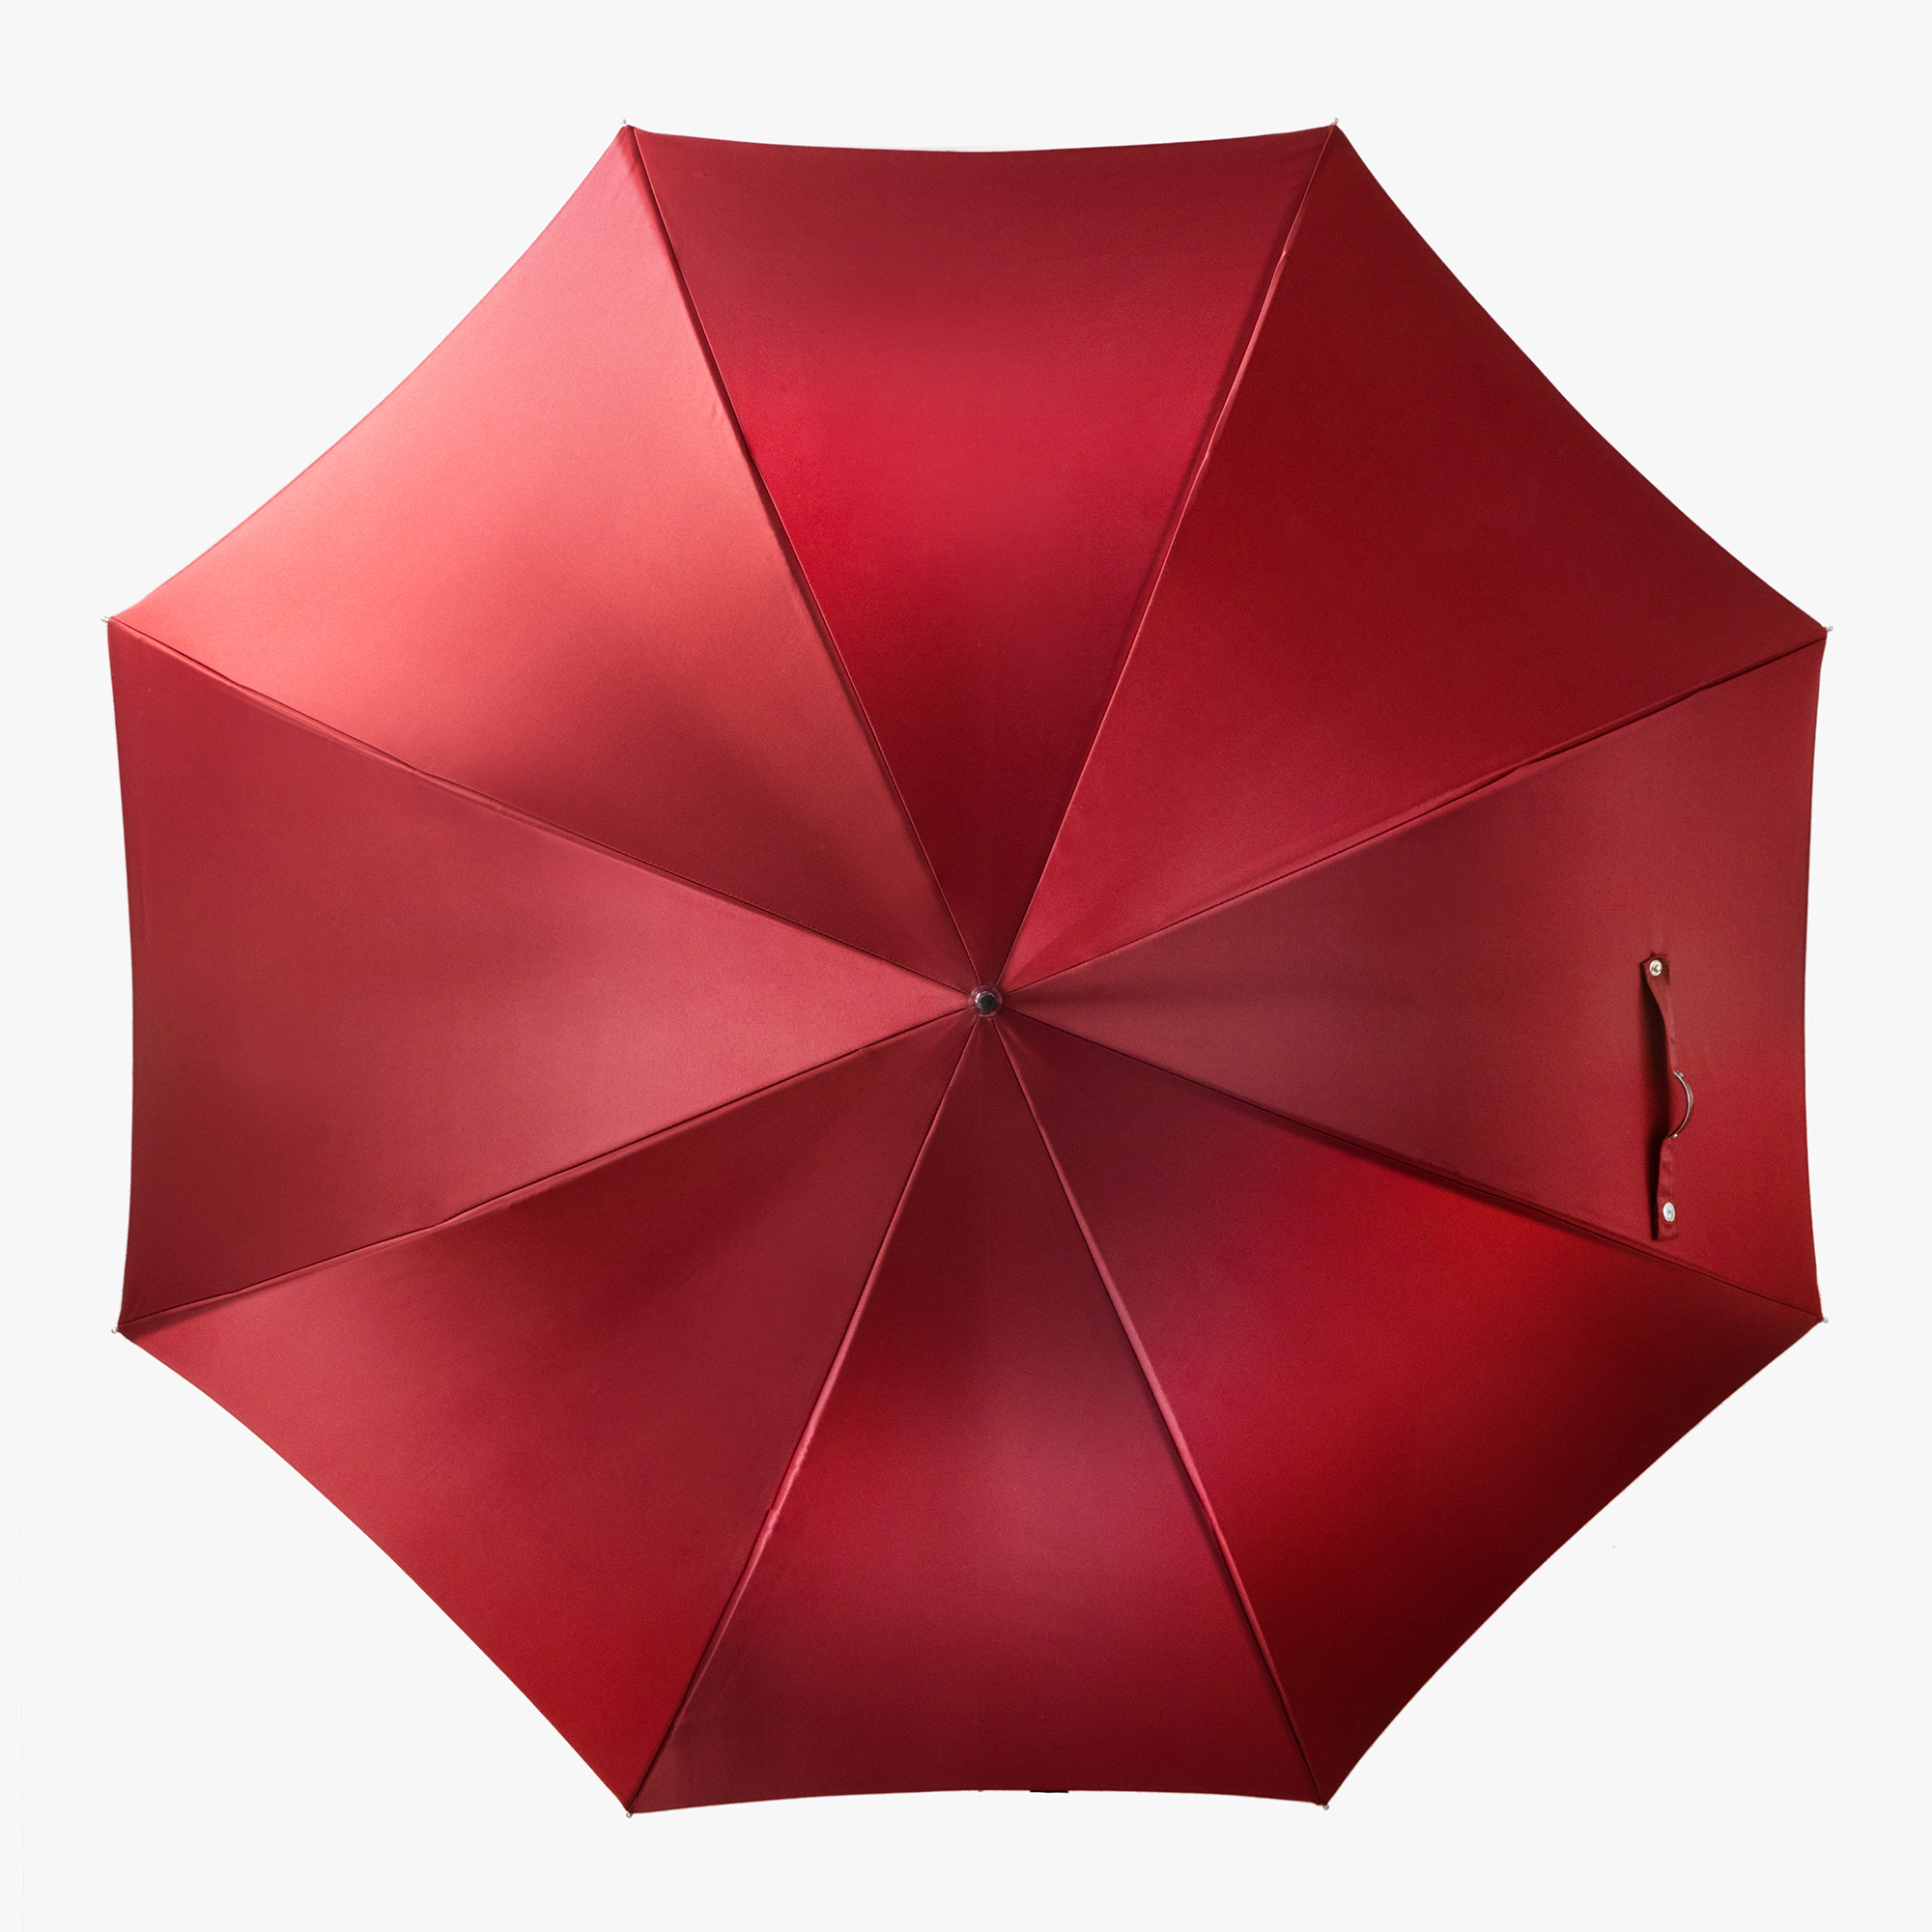 Bull umbrella with a straight handle